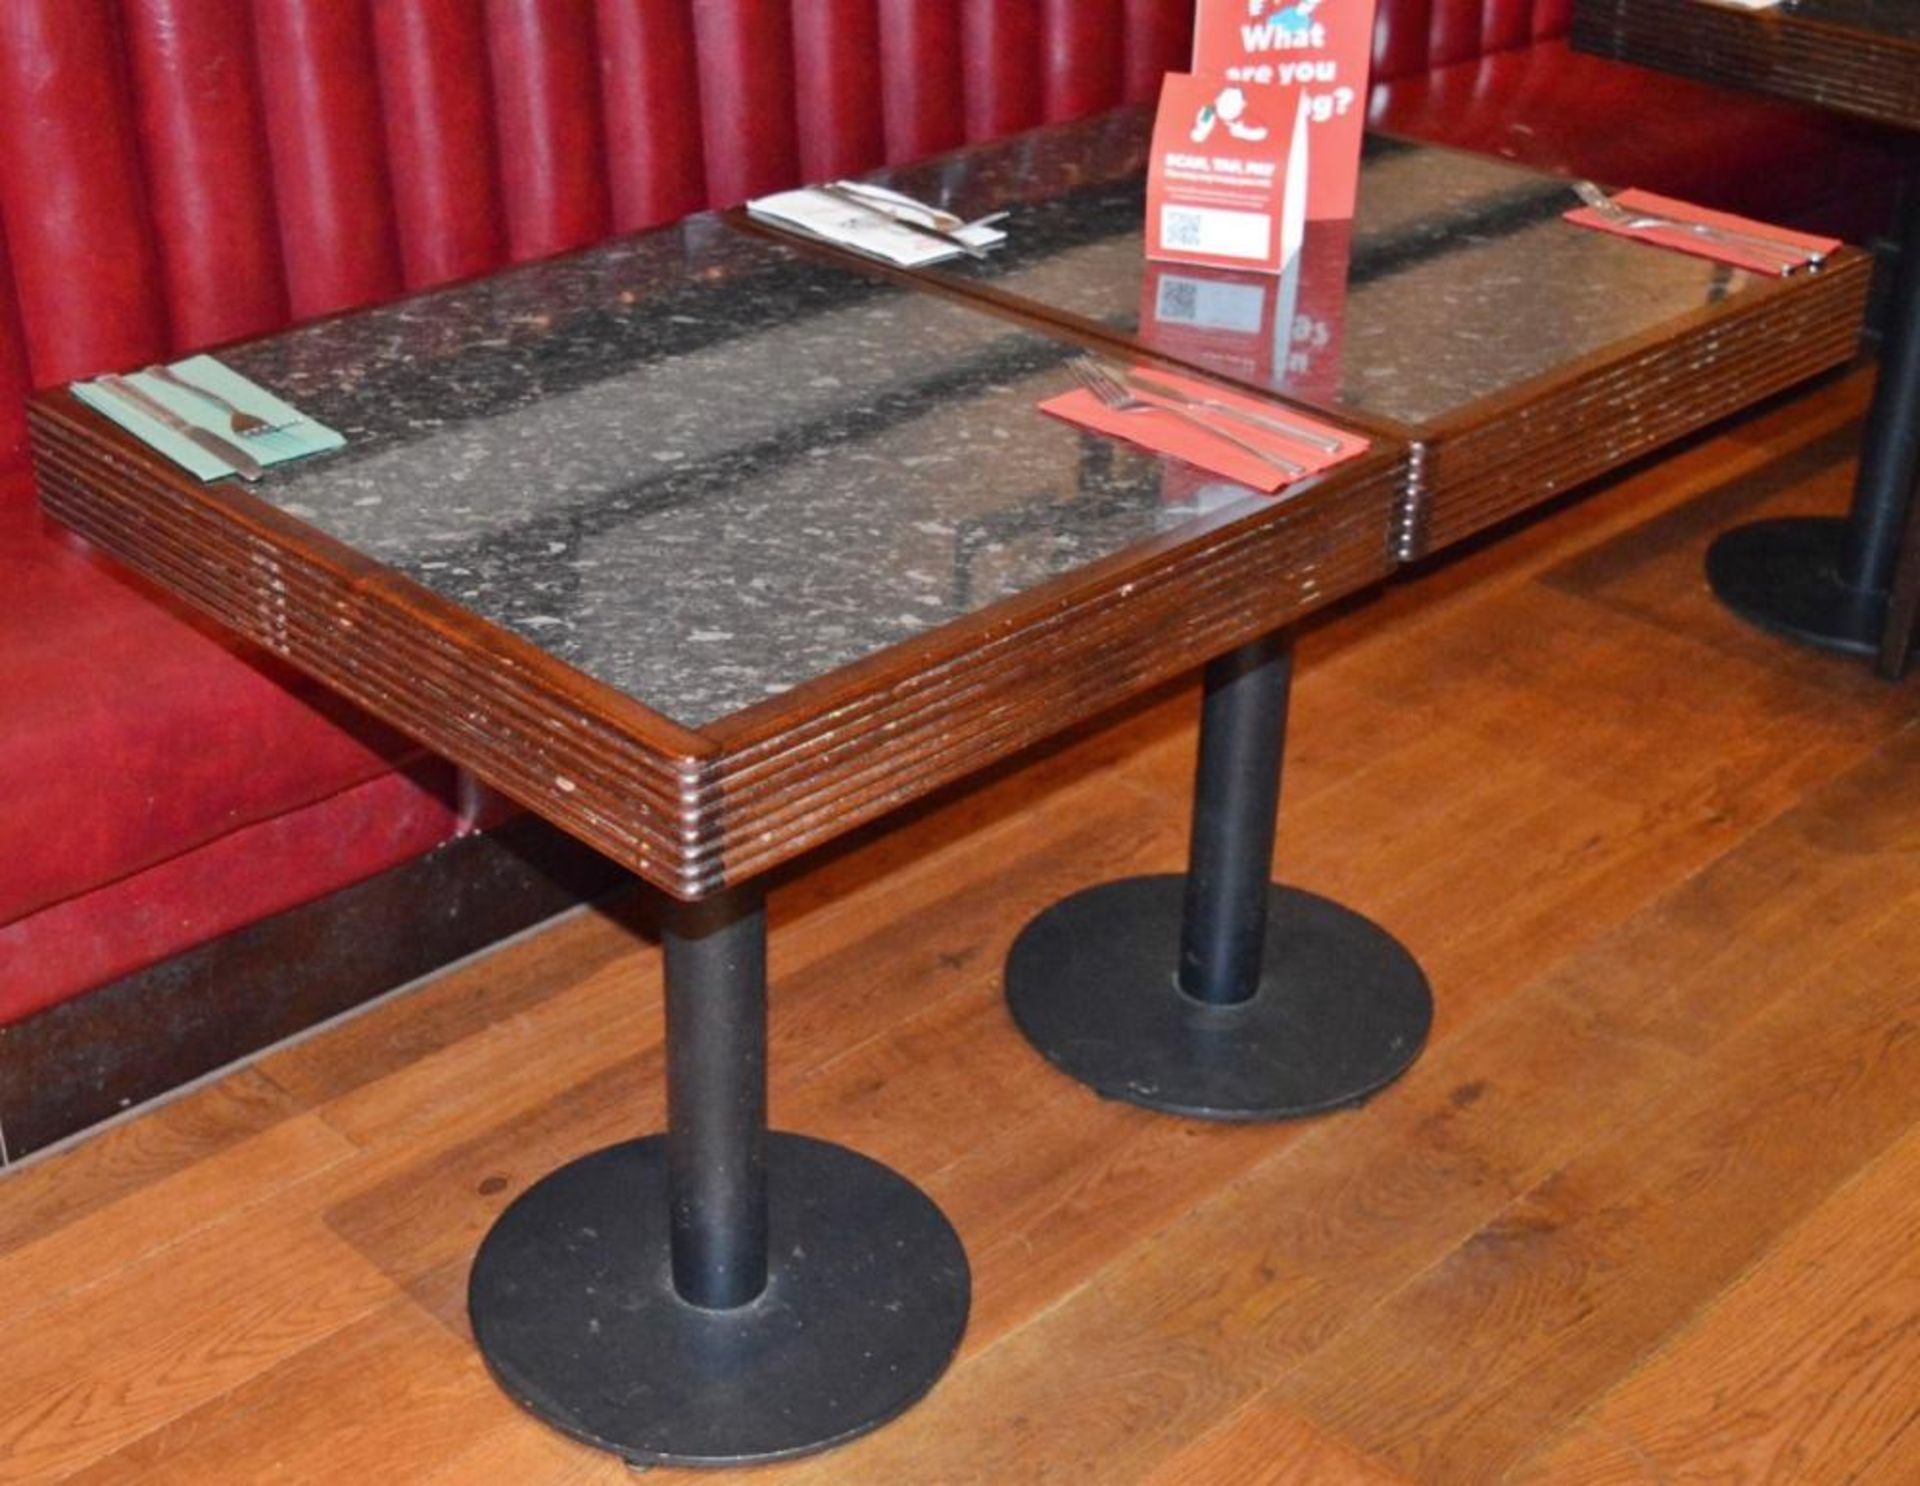 4 x Square Restaurant / Bistro Tables - Each Features A Wood Framed Top And Metal Base - 70x62xH80cm - Image 2 of 5